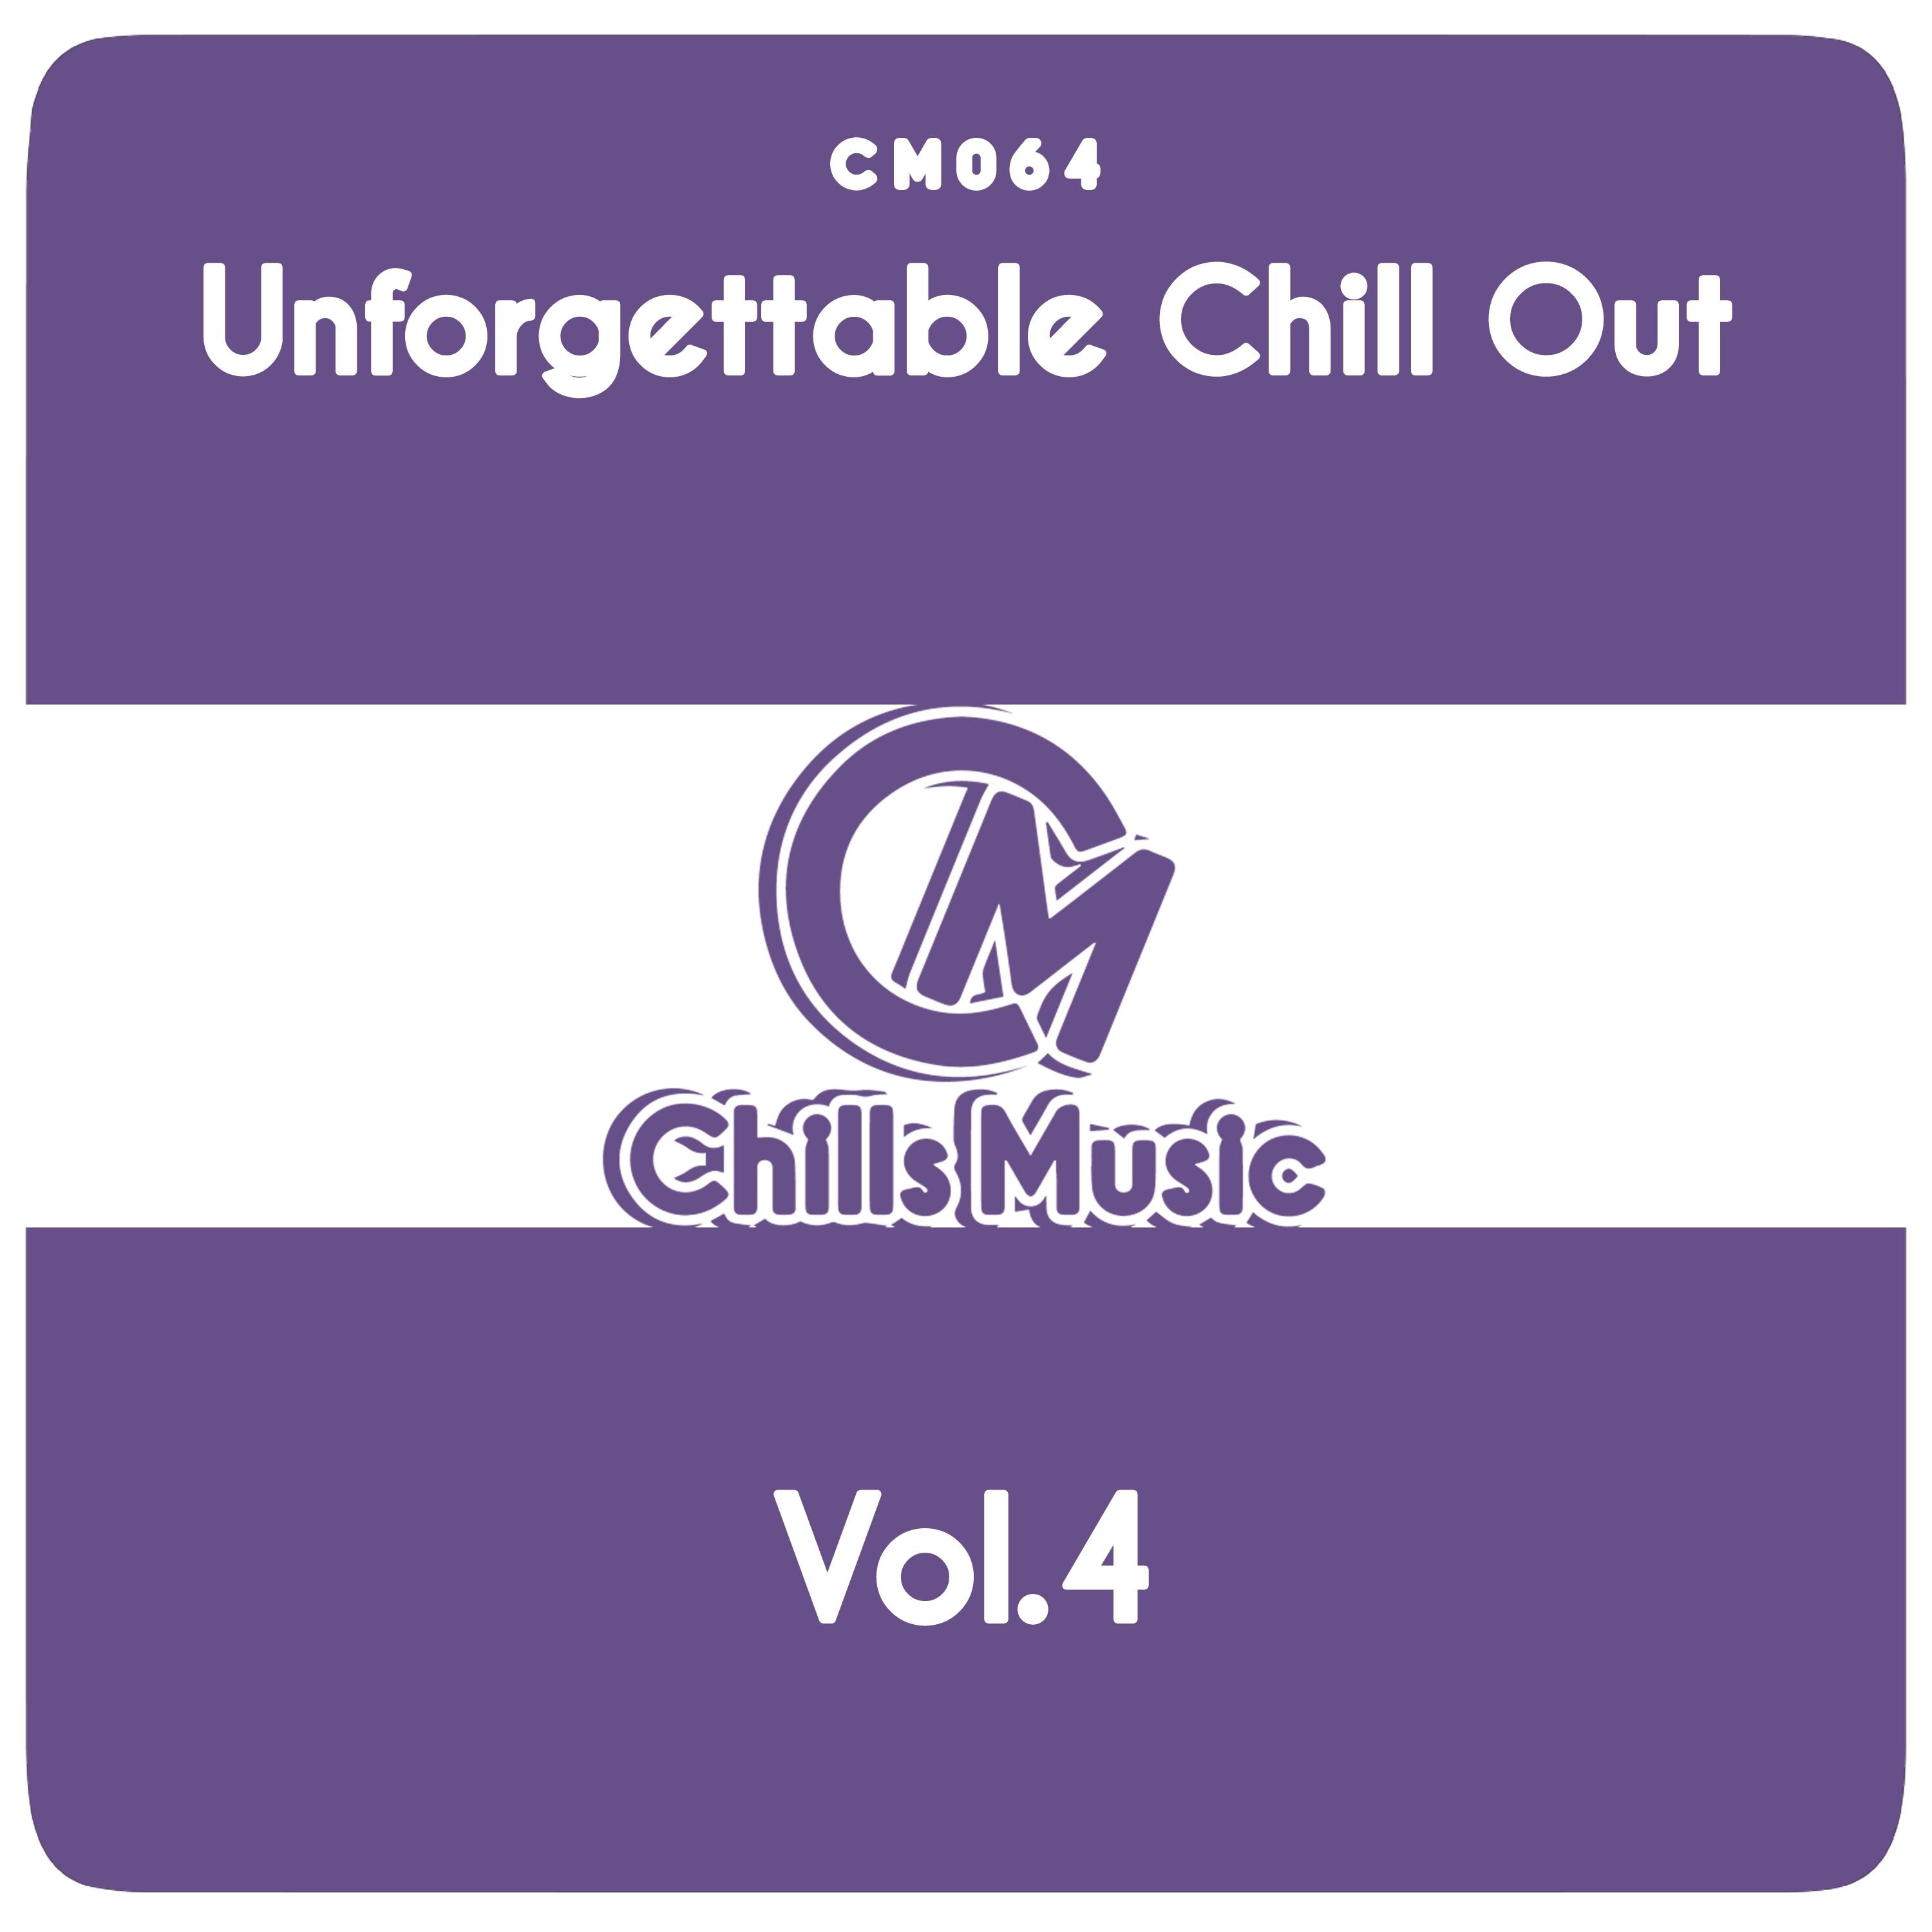 Unforgettable Chill Out, Vol. 4